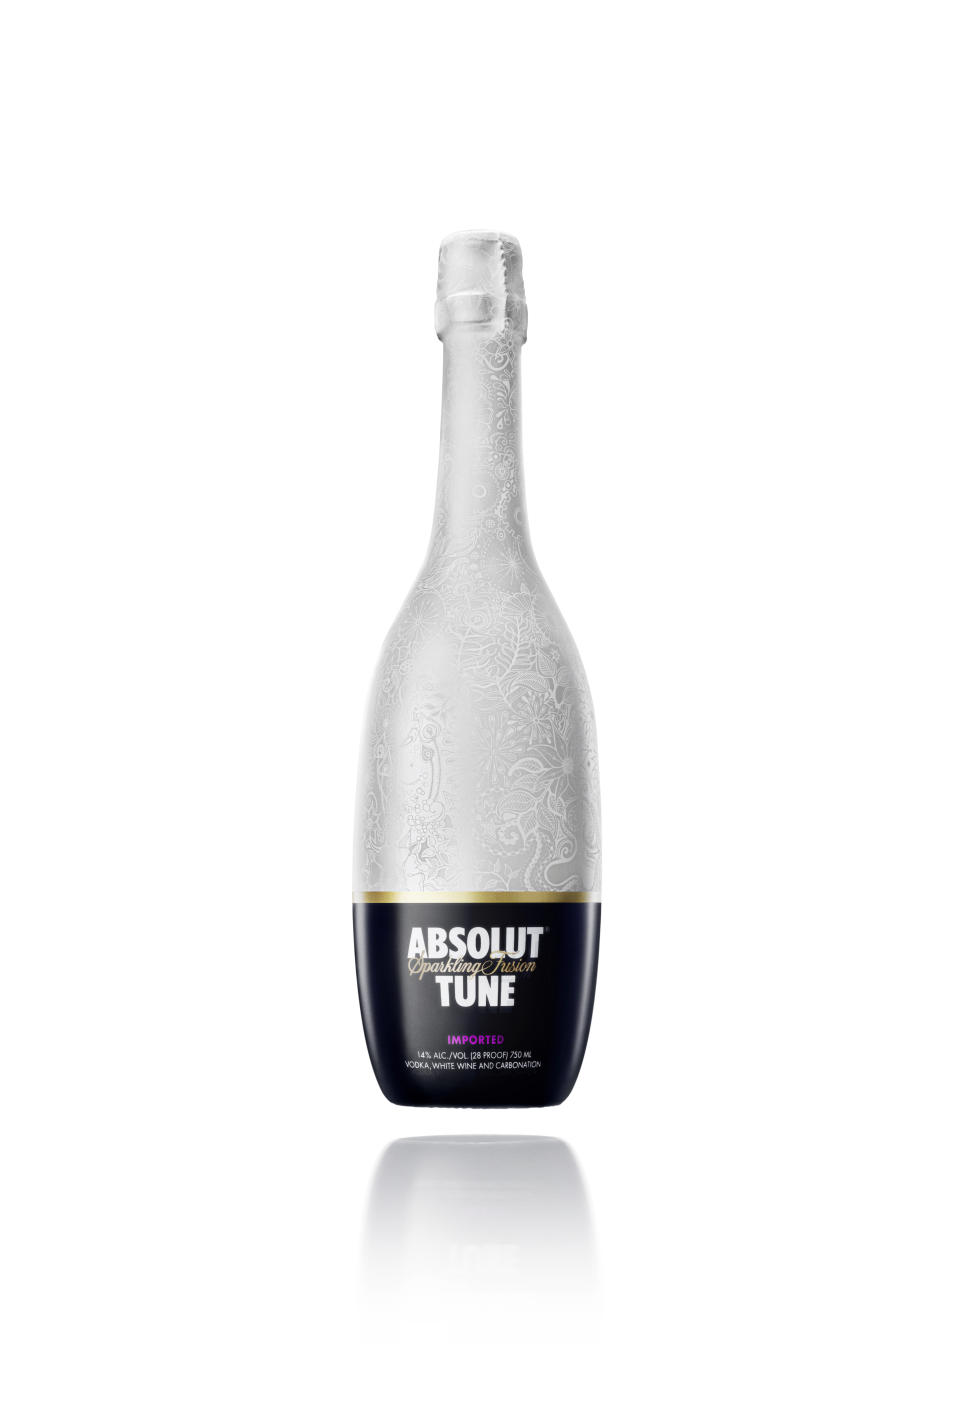 This undated publicity photo provided by ABSOLUT Vodka shows a bottle of ABSOLUT TUNE, a mix of vodka and sparkling sauvignon blanc . (AP Photo/ABSOLUT Vokda)